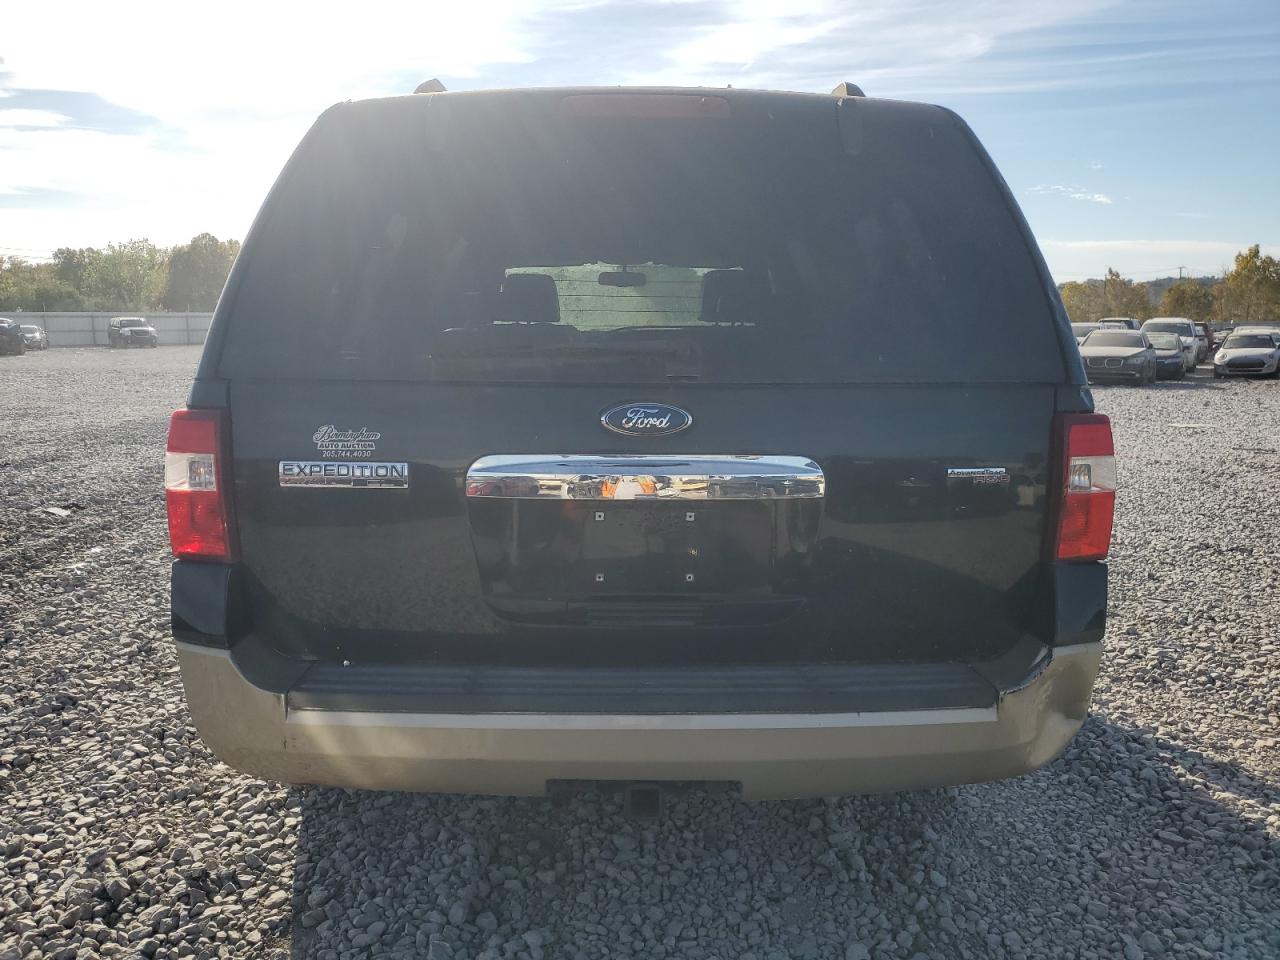 1FMFK17587L****** Salvage and Repairable 2007 Ford Expedition in Alabama State